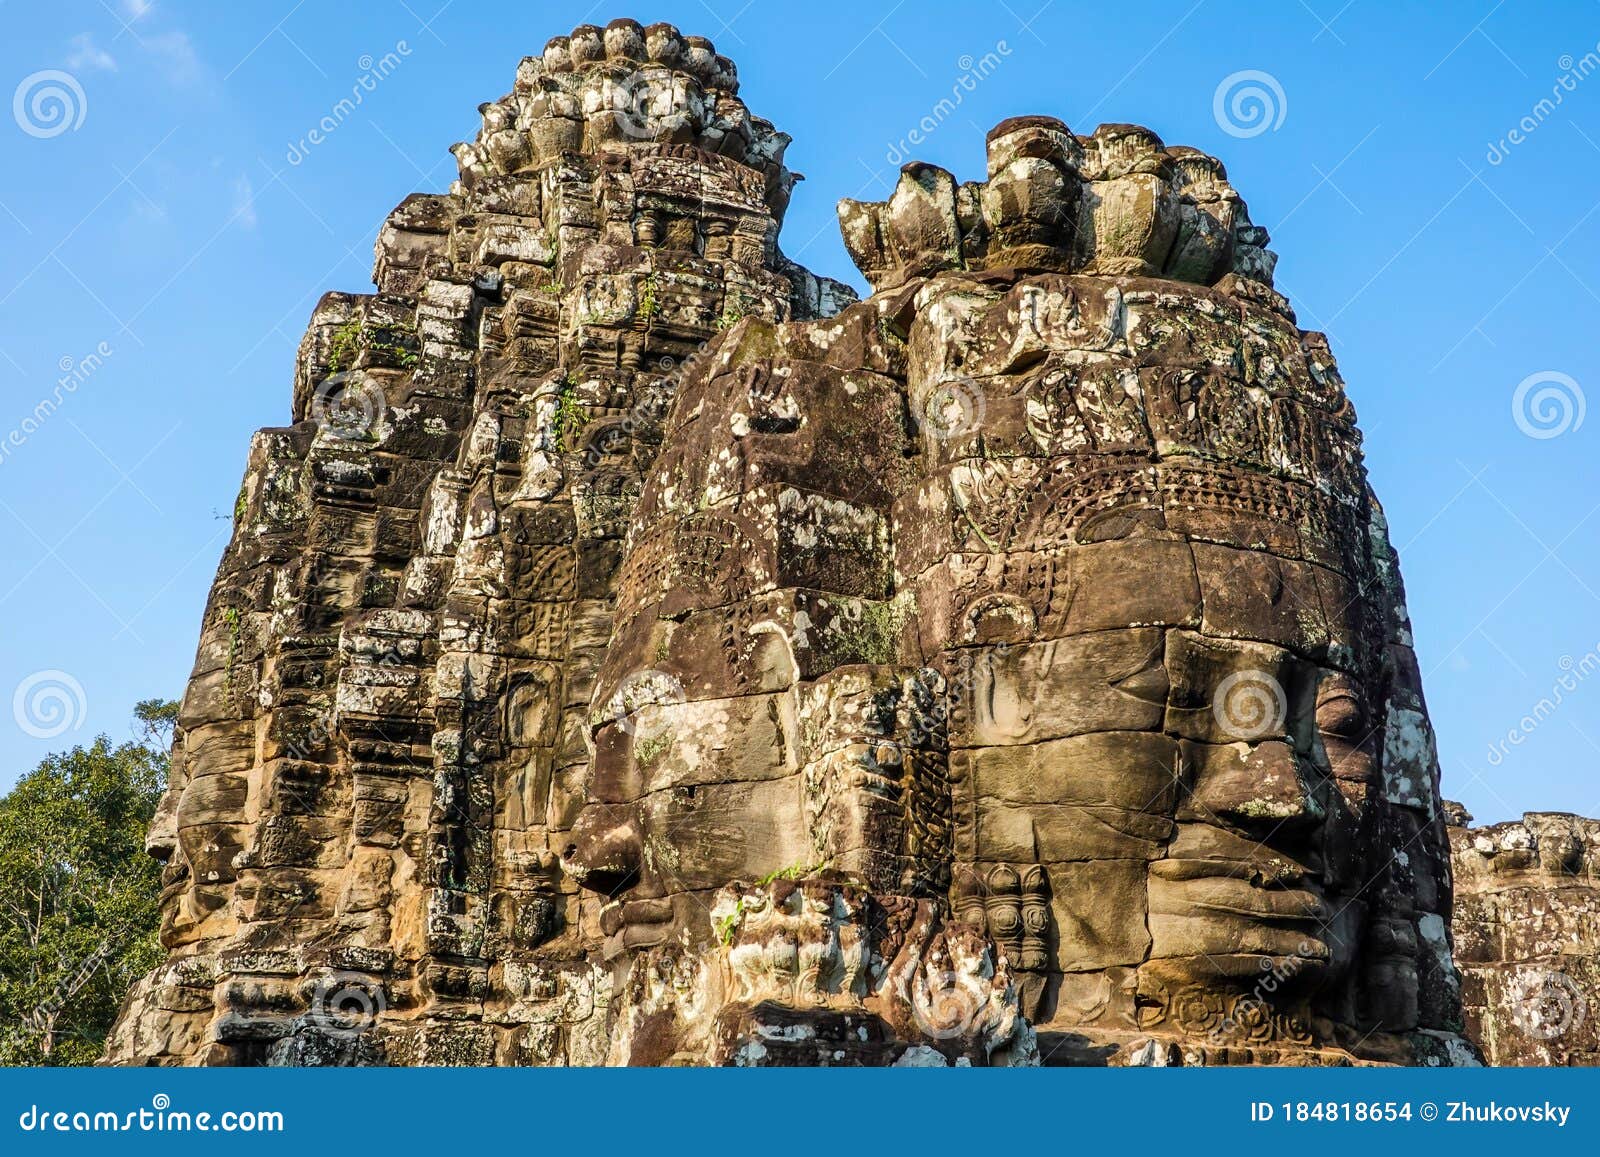 famous faces of bayon, the most notable temple at angkor thom, cambodia